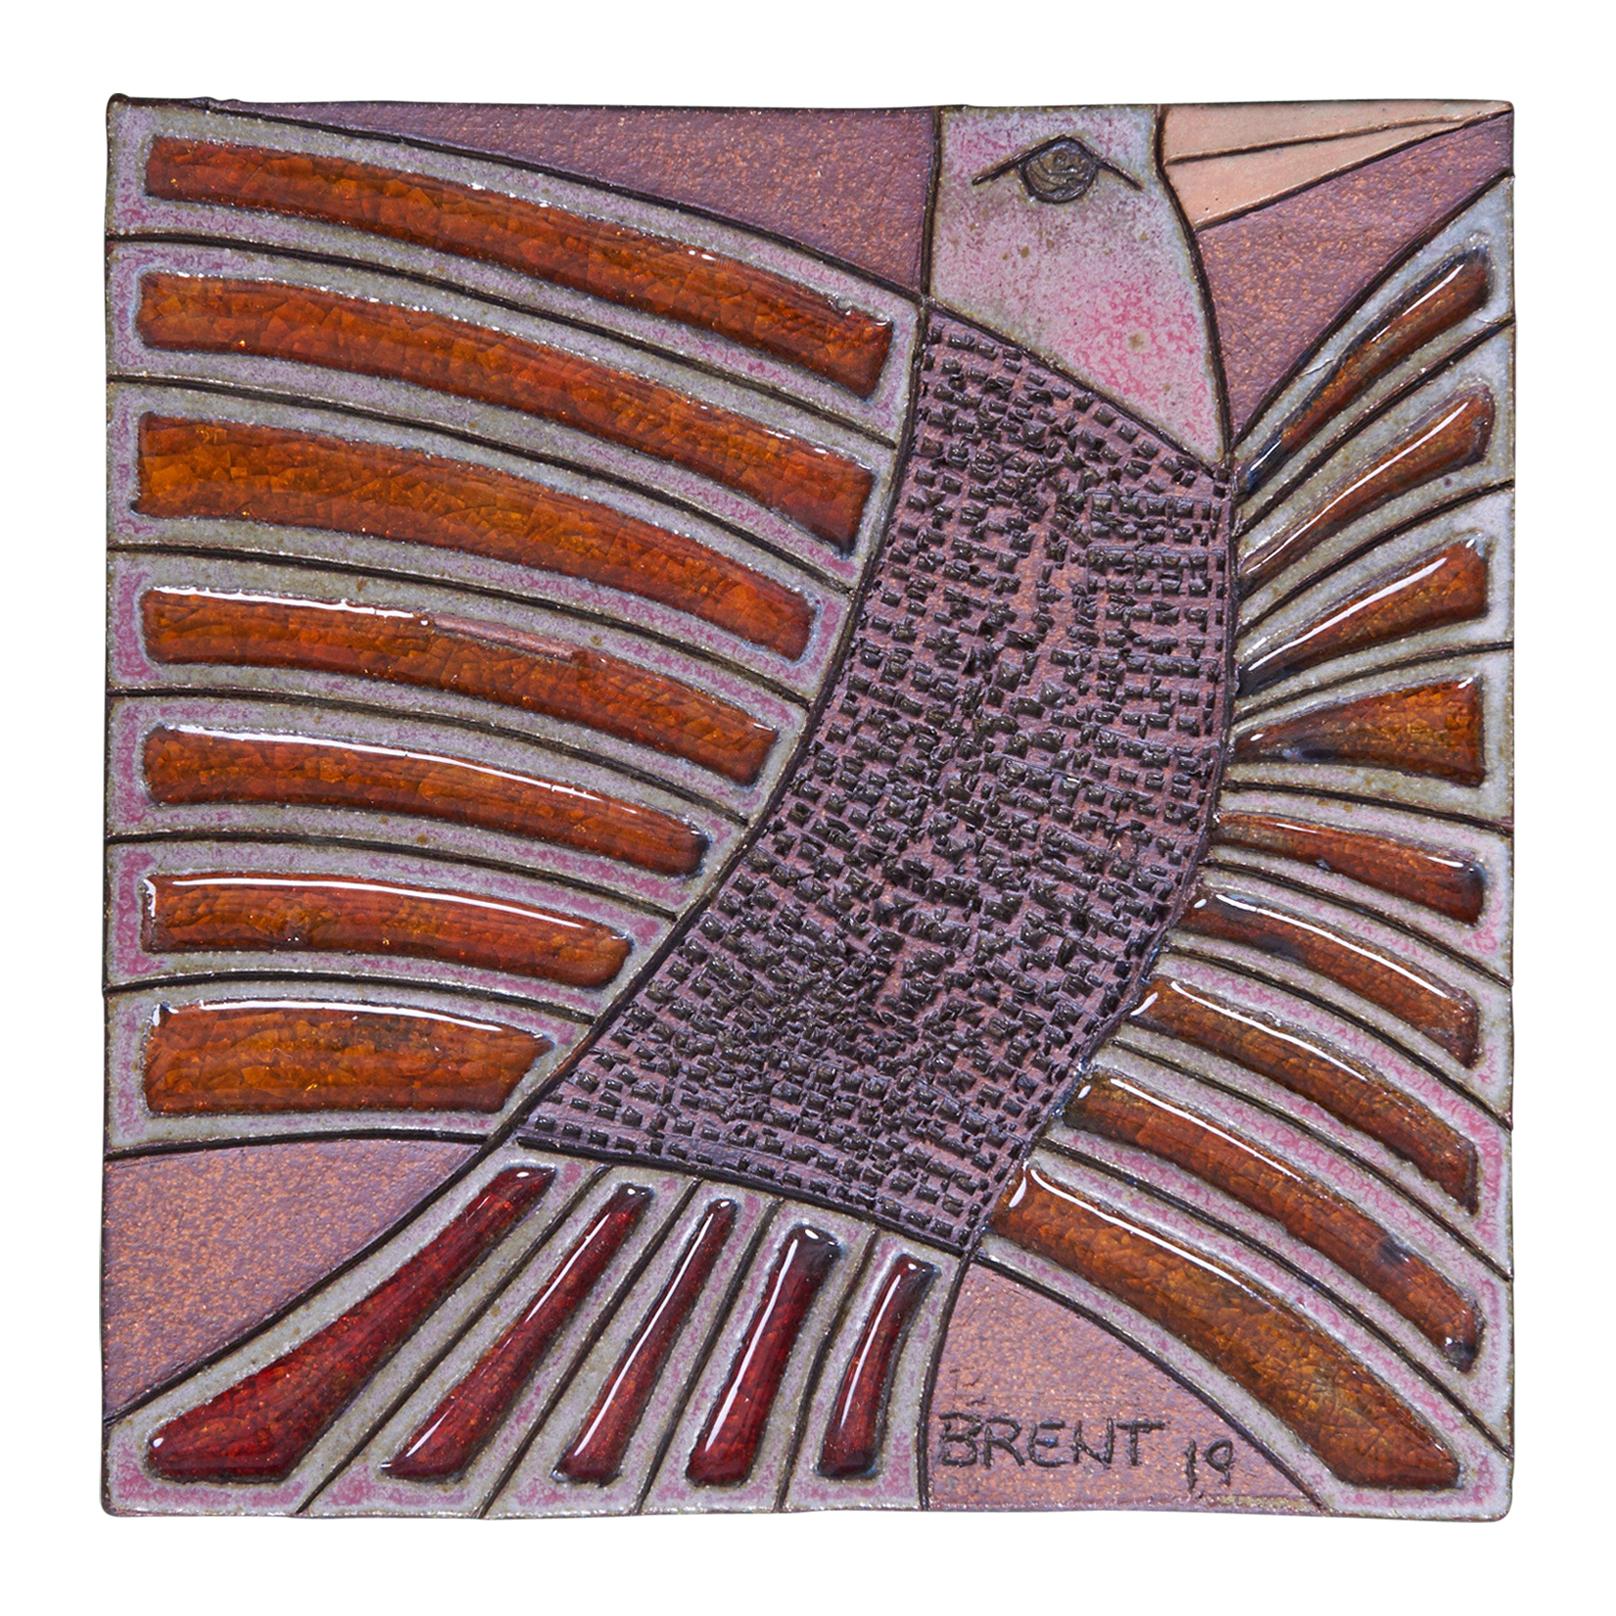 Red Tailed Hawk Plaque by Brent J. Bennett, US, 2019